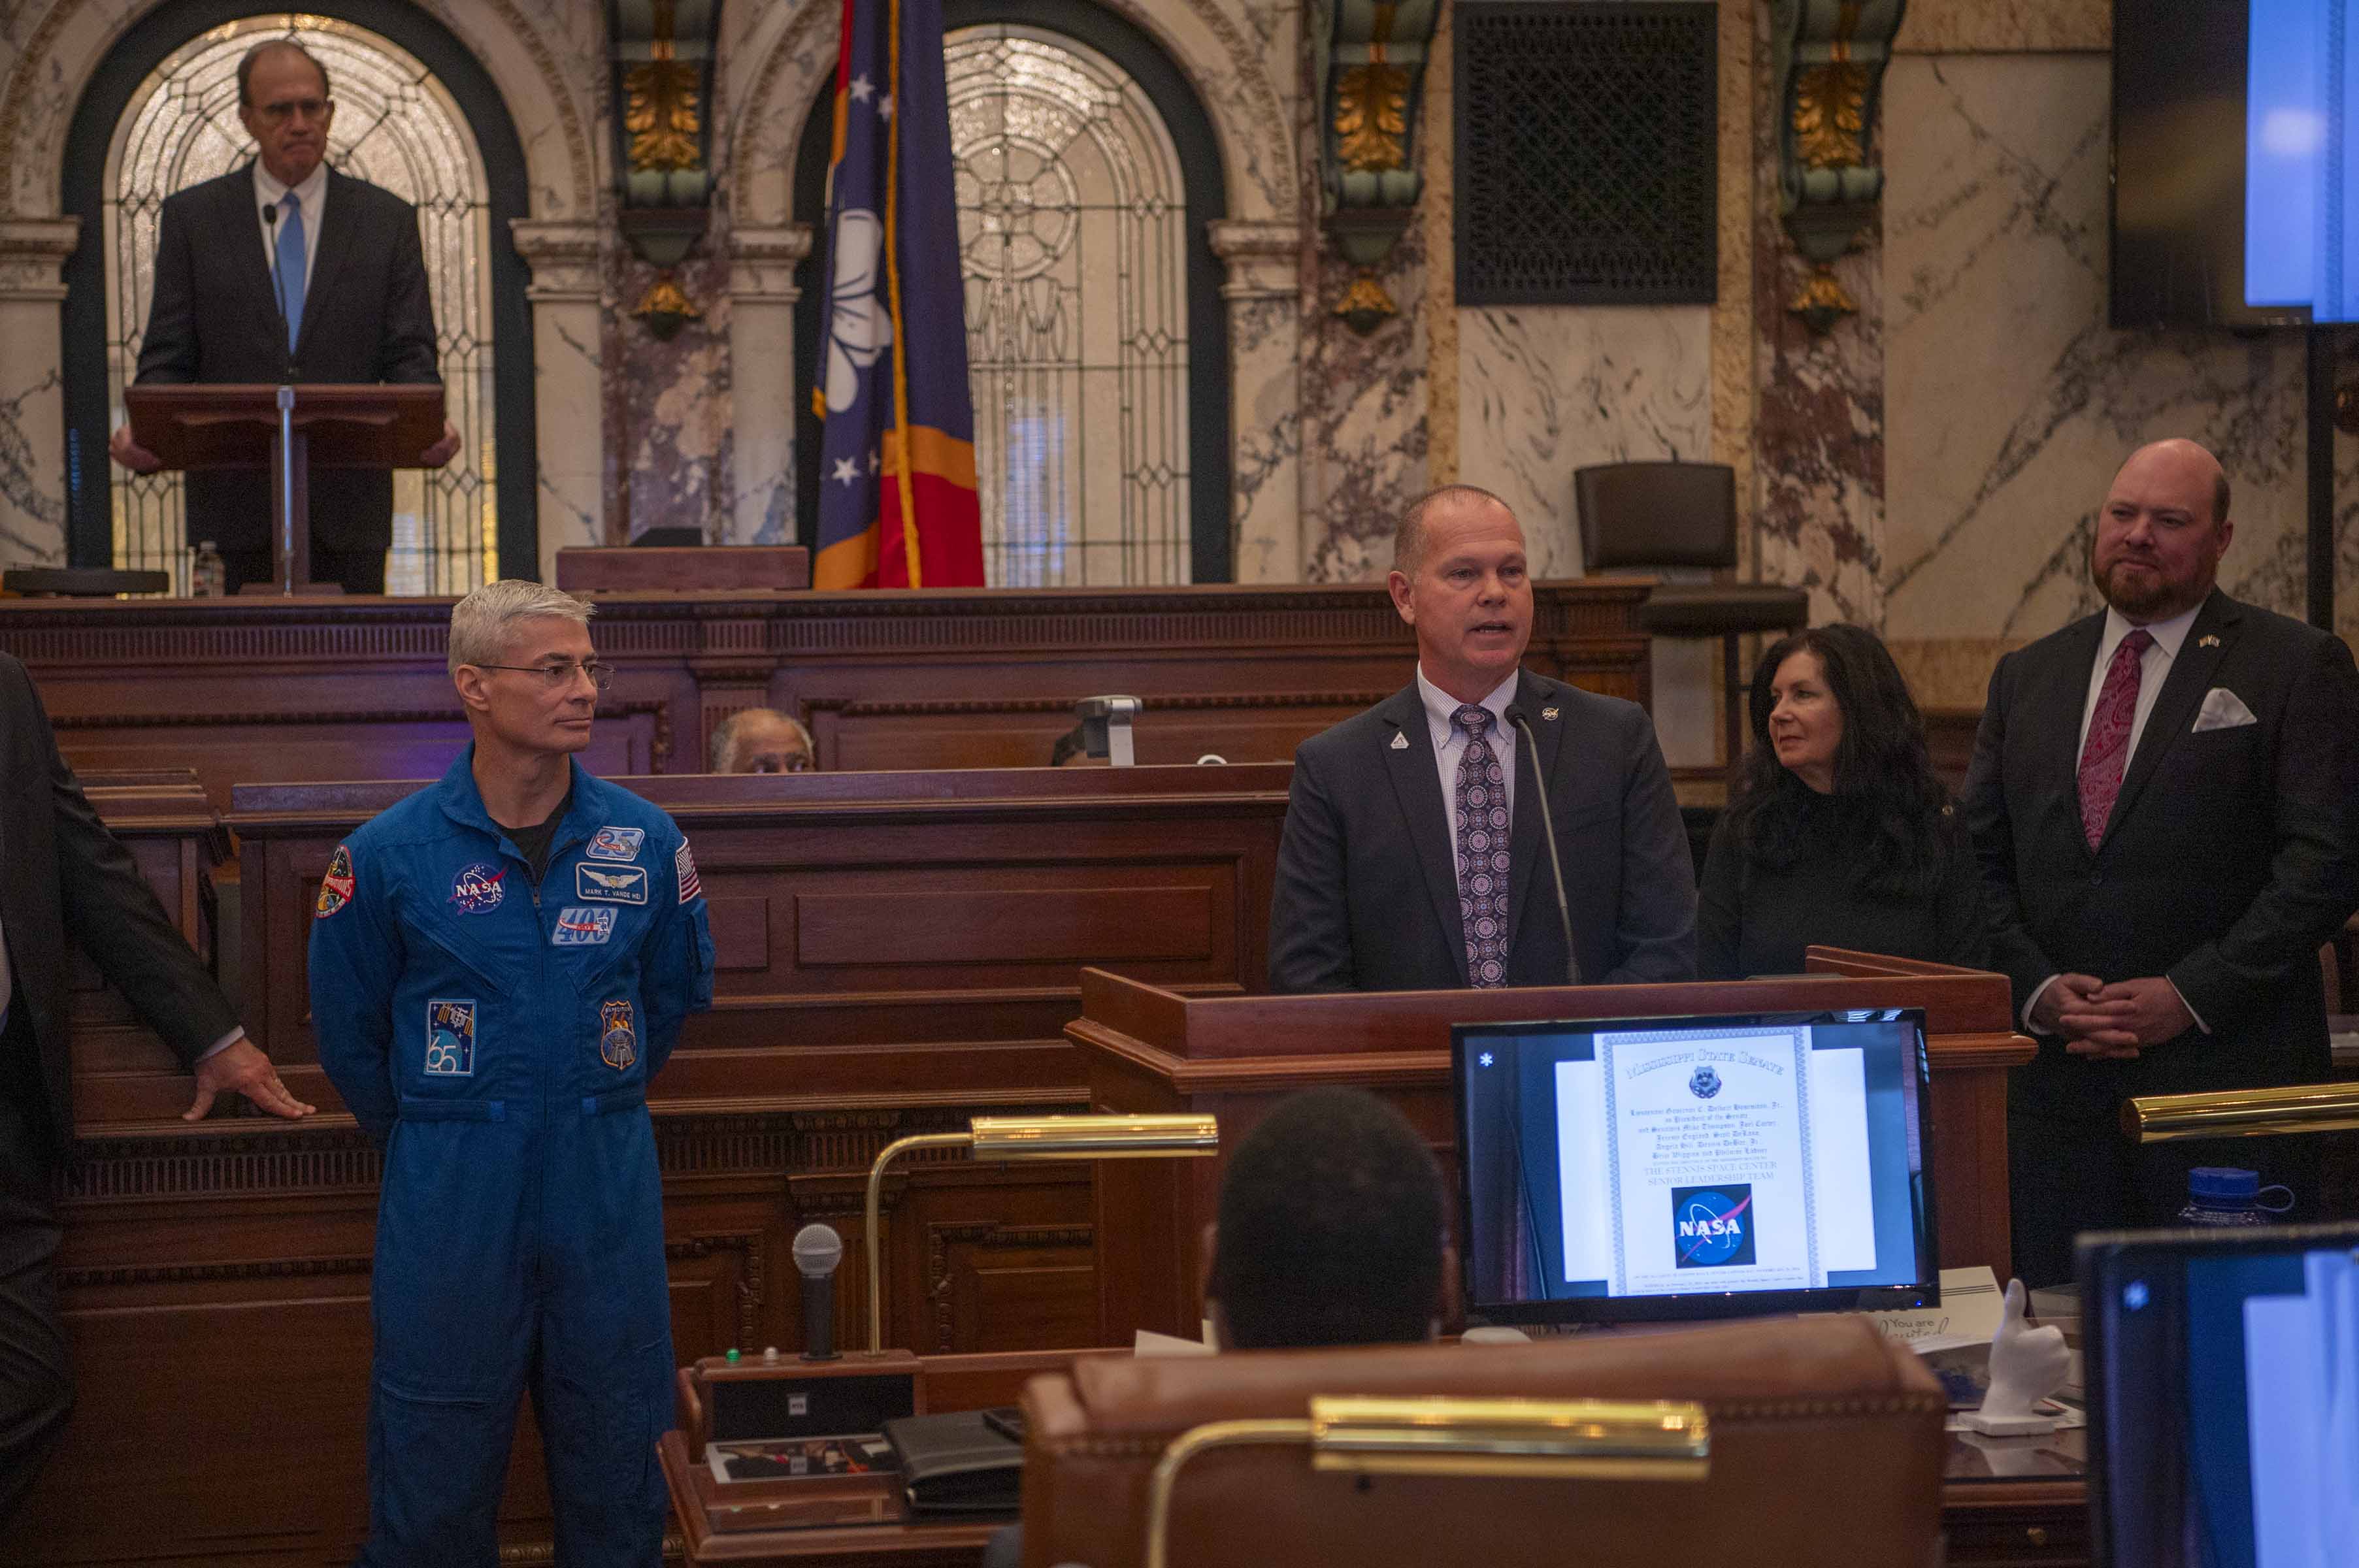 NASA Stennis Acting Center Director John Bailey addresses members of the Mississippi Senate during Stennis Day at the Capitol